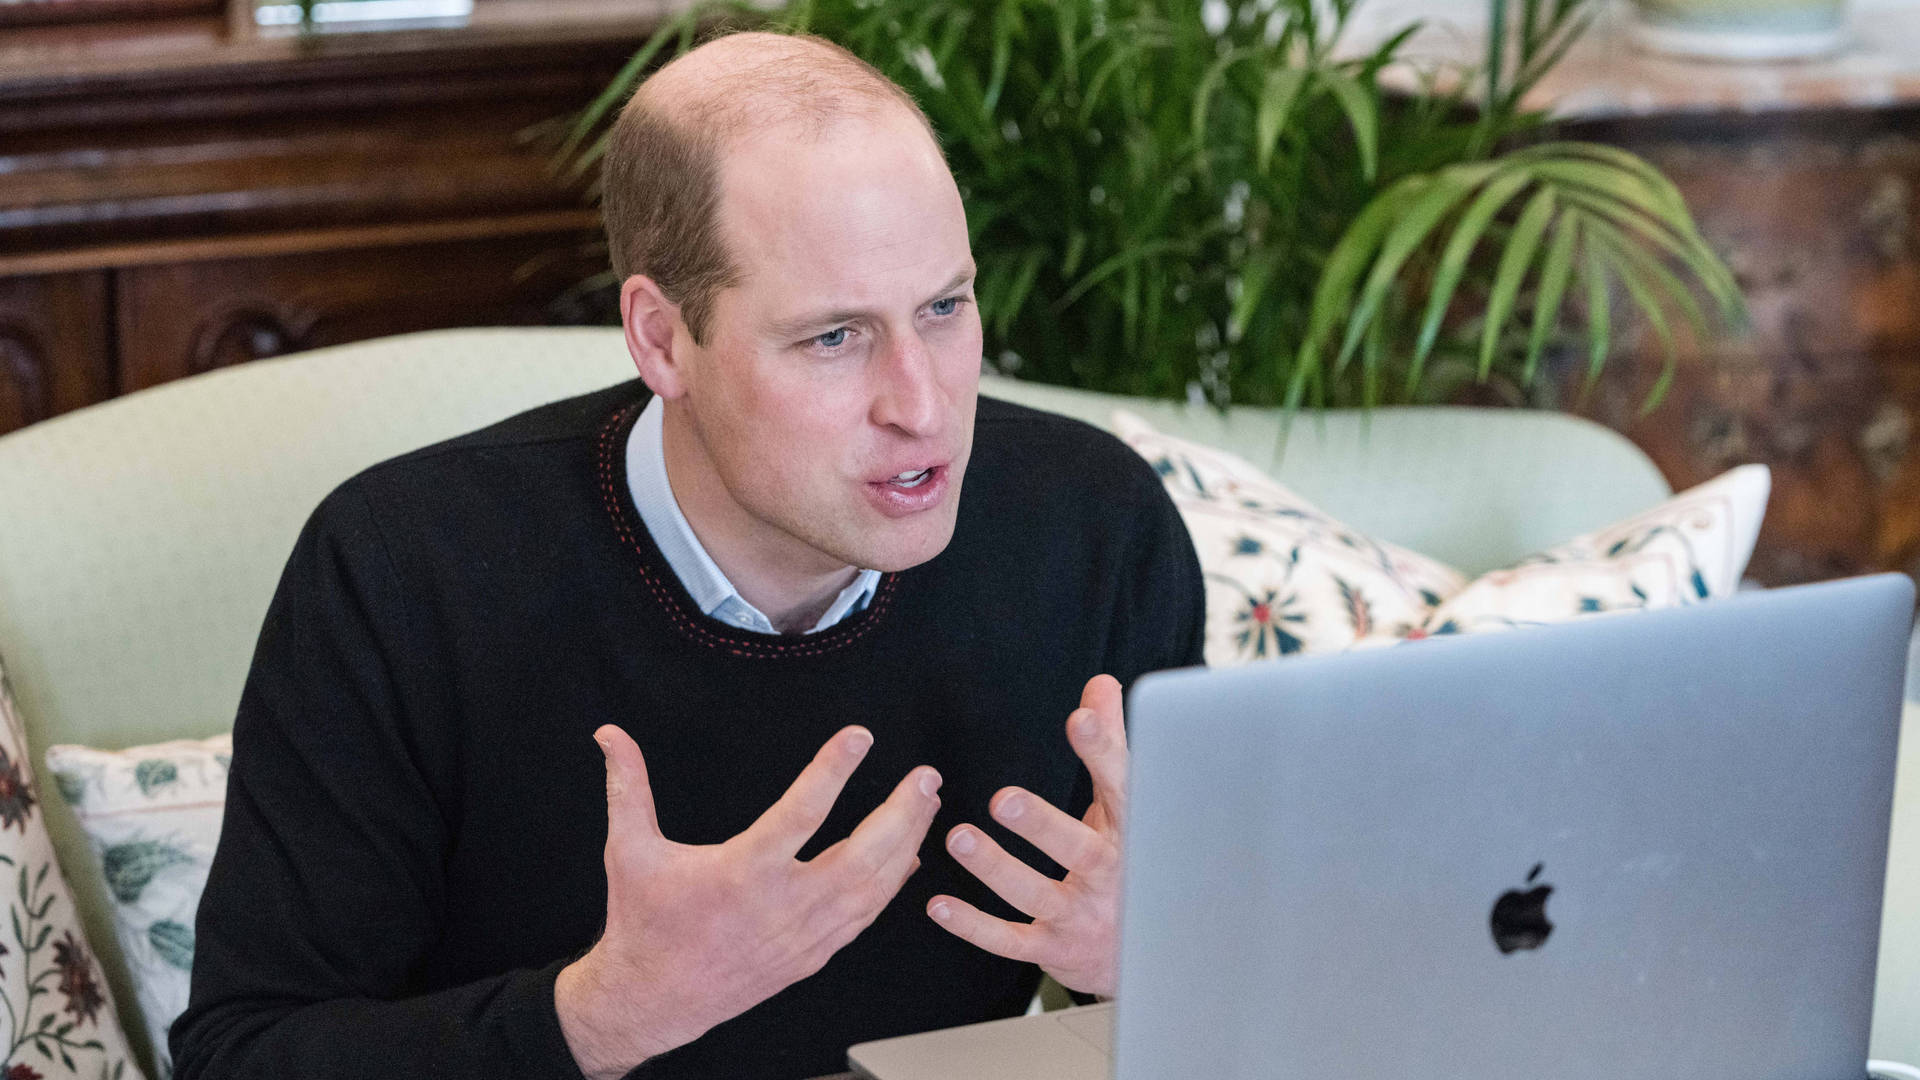 Prince William With MacBook Wallpaper